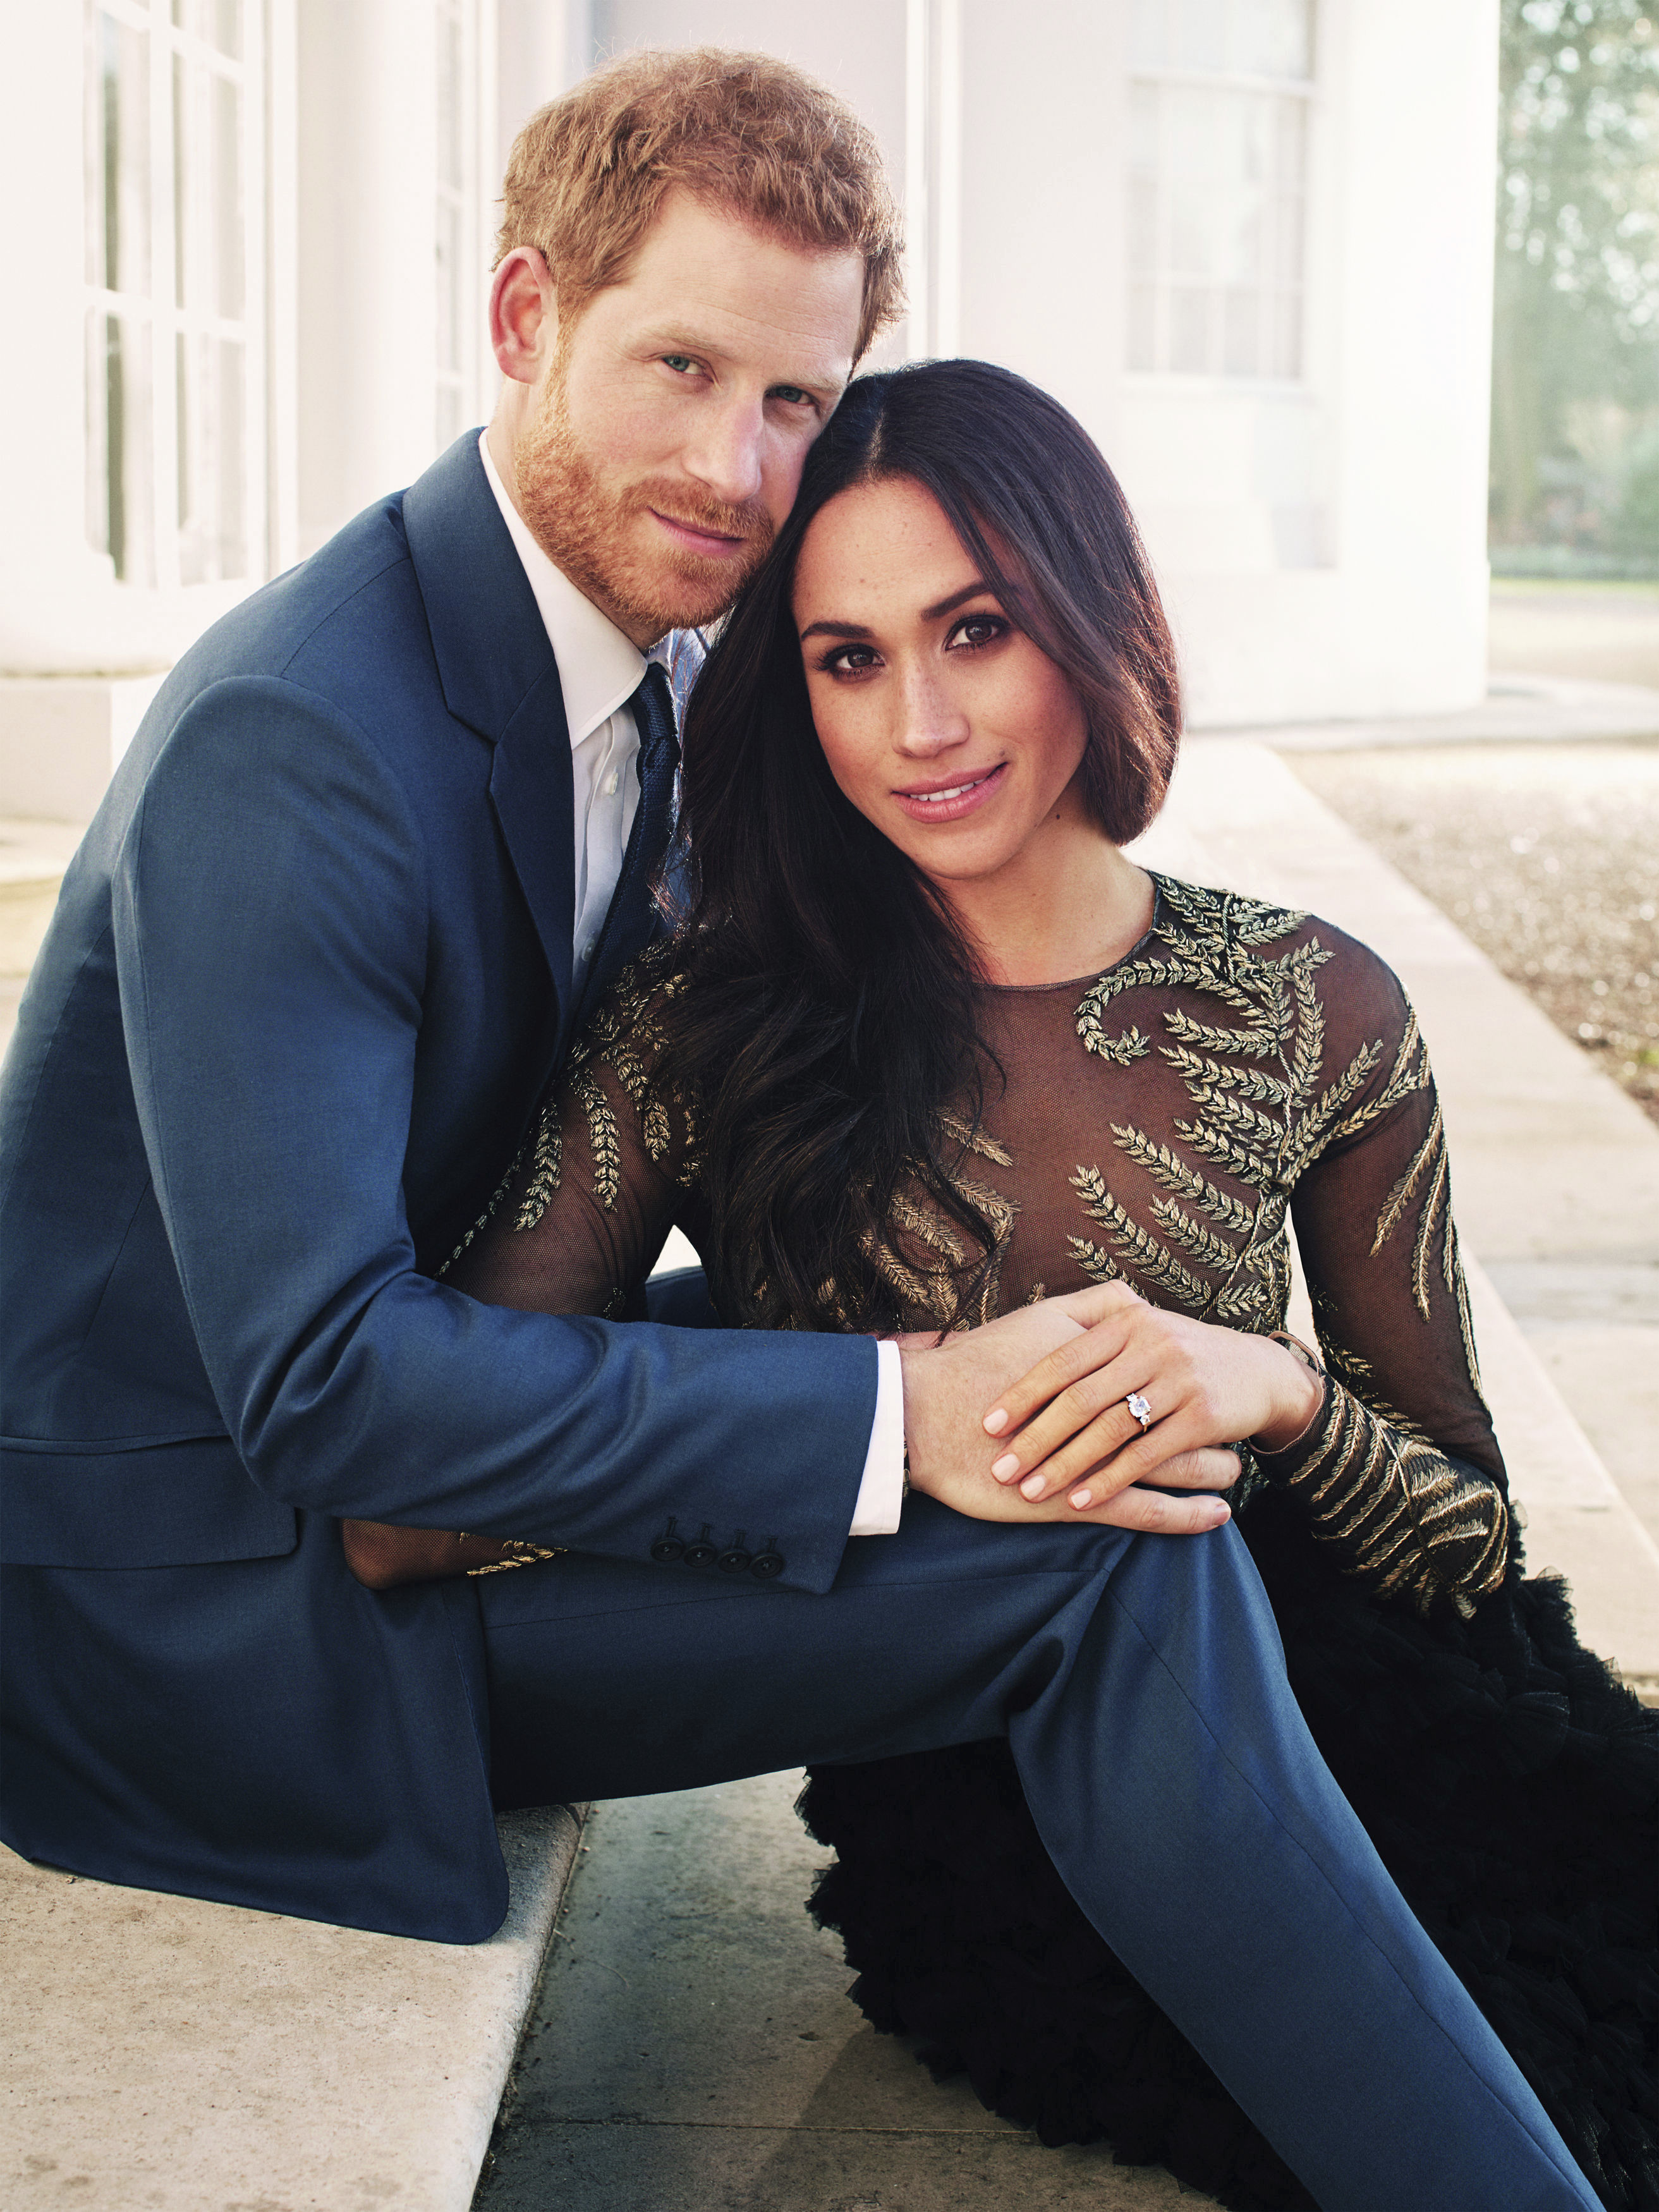 In this photo released by Kensington Palace on Thursday, Dec. 21, 2017, Britain's Prince Harry and Meghan Markle pose for one of two official engagement photos, at Frogmore House, in Windsor, England. (Alexi Lubomirski via AP)